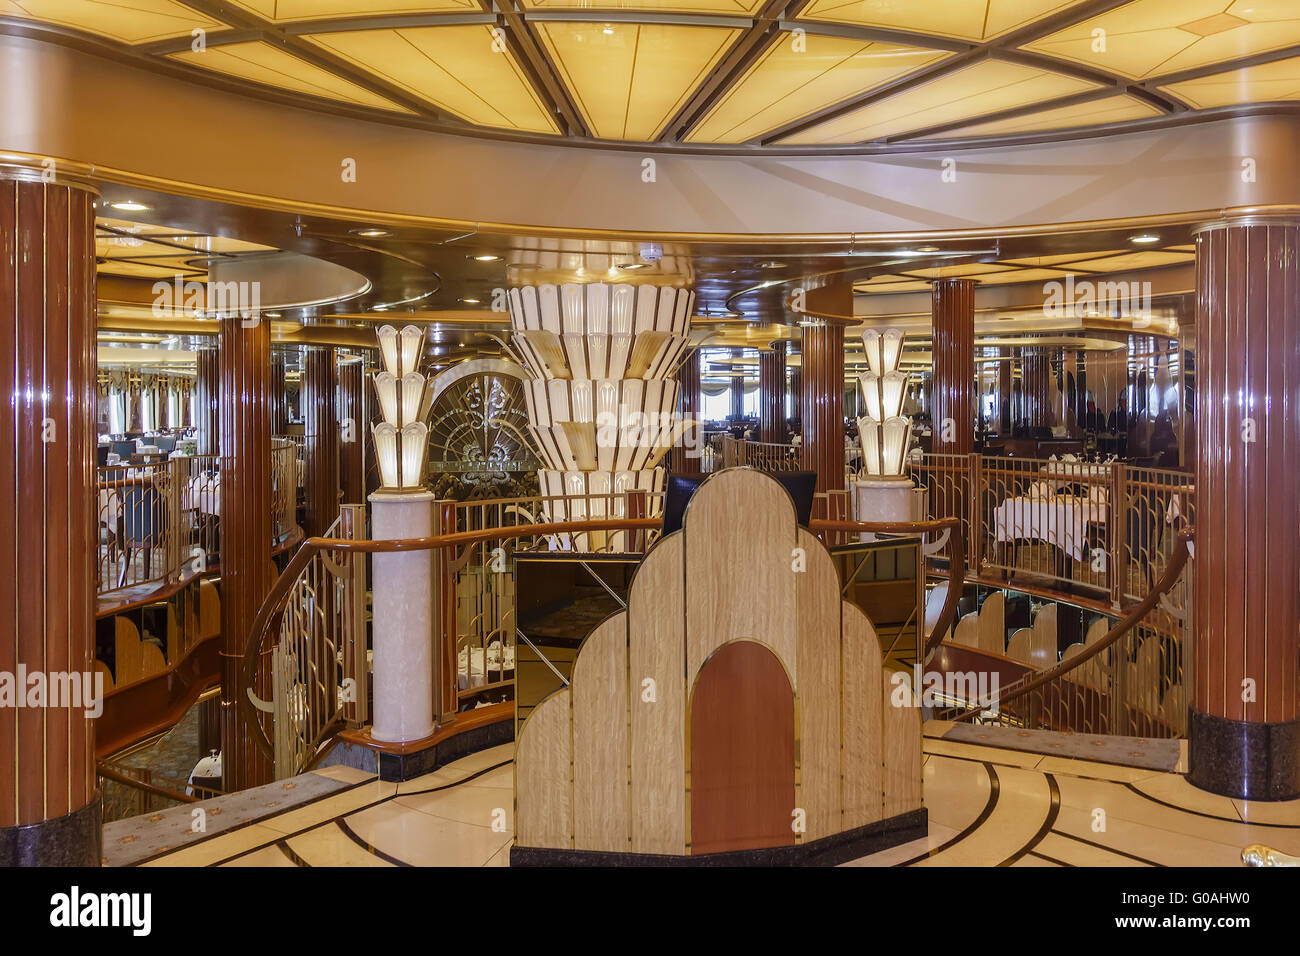 Inside View Of Cruise Ship Showing Entrance To Res Stock Photo